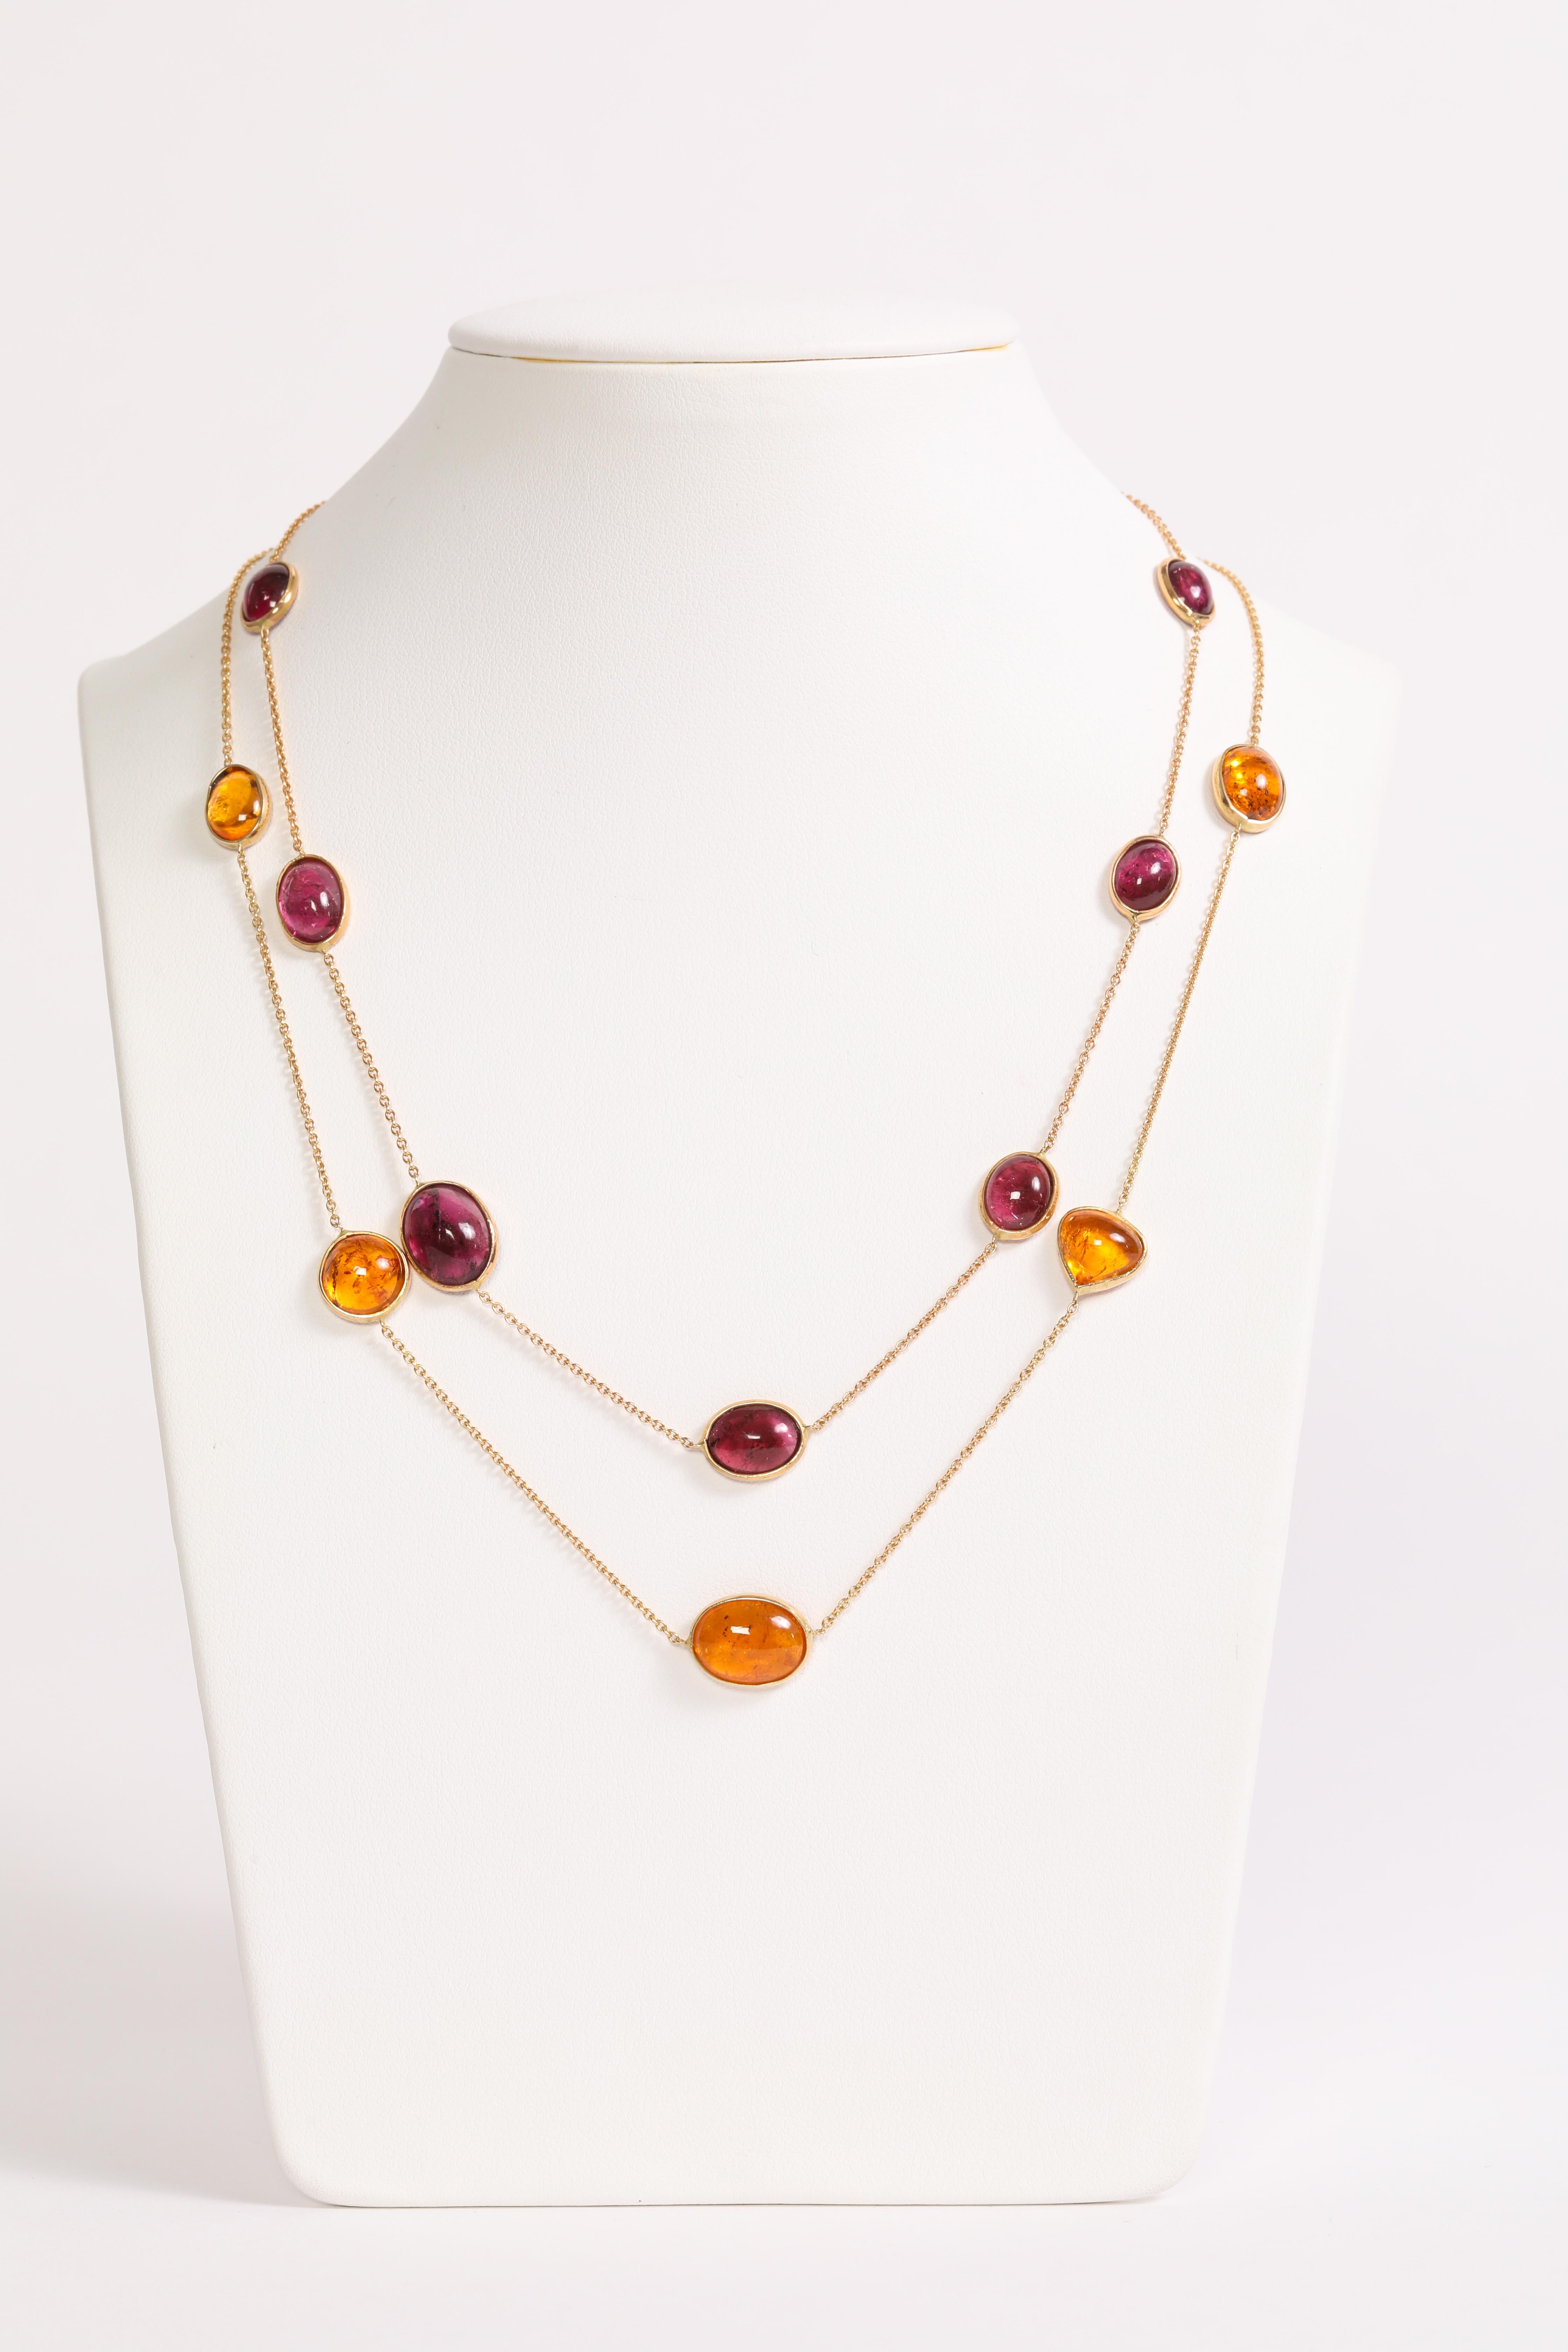 Contemporary Two Yellow Gold Chain Necklaces Set With Garnet and Tourmaline by Marion Jeantet